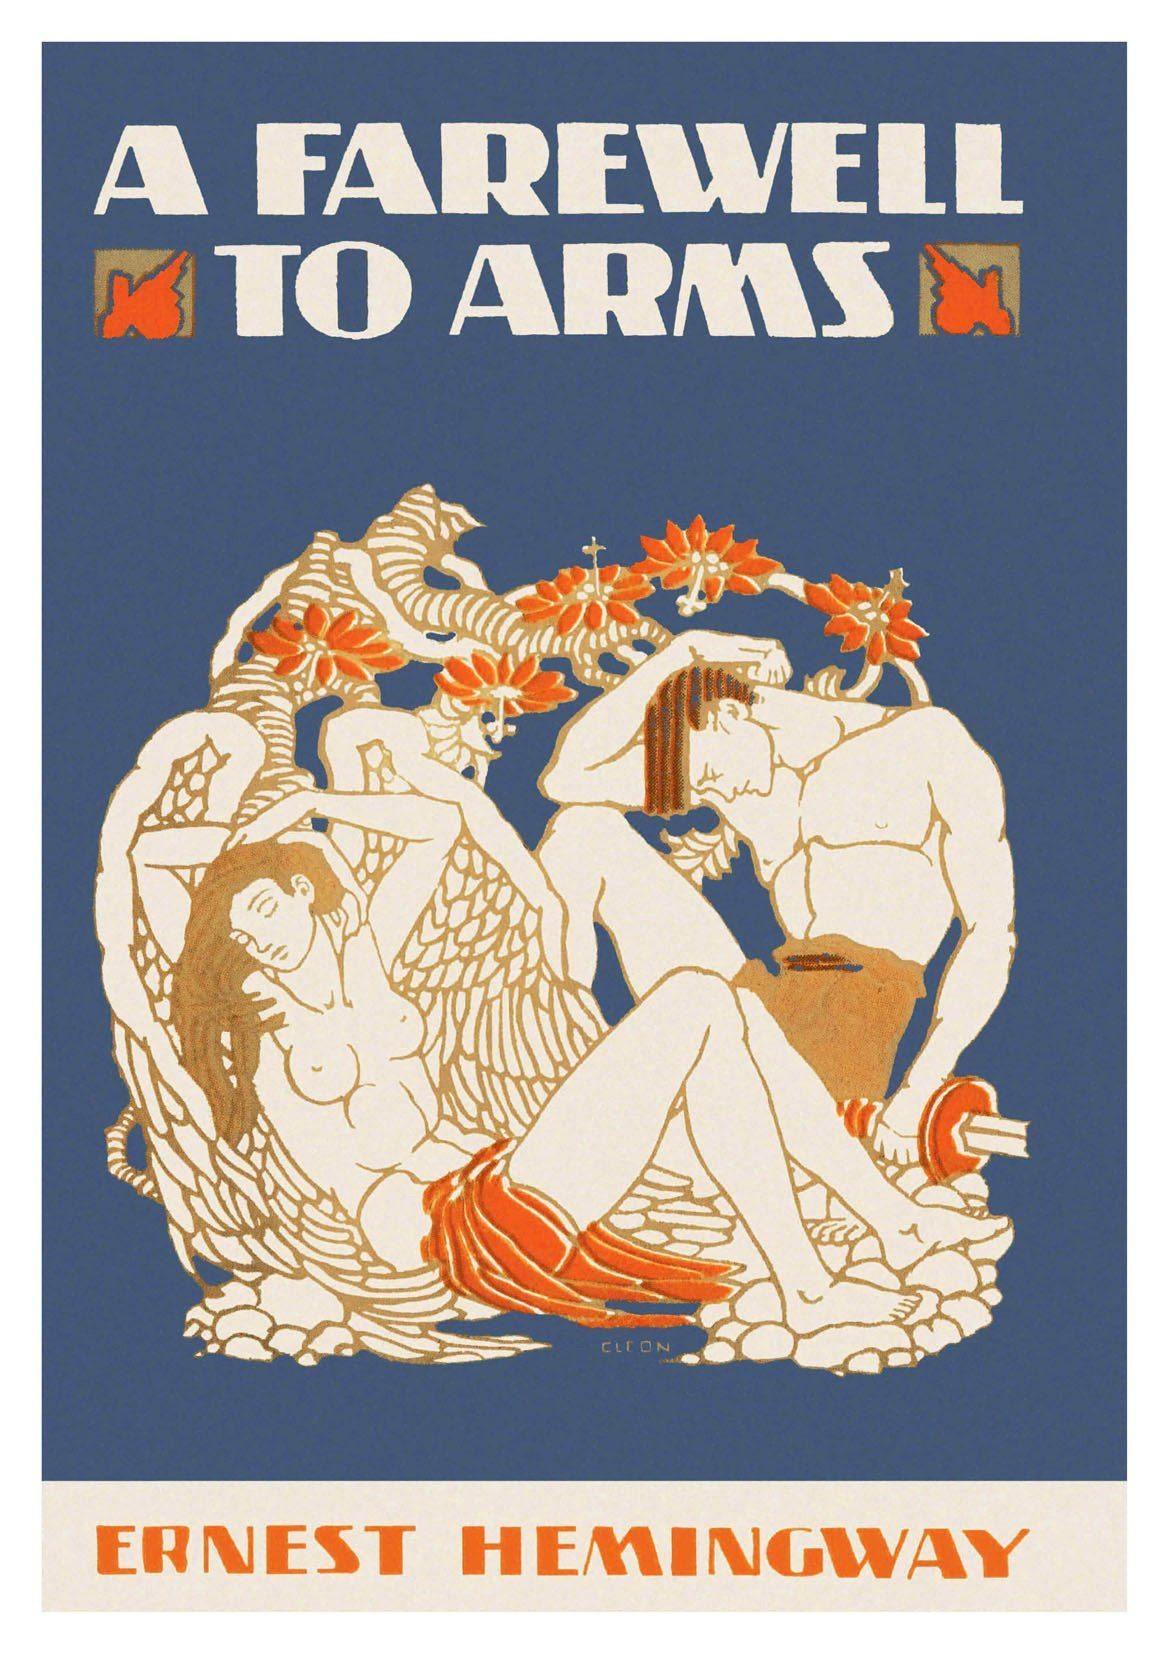 BOOK COVER PRINT: A Farewell to Arms Hemingway Art Poster - Pimlico Prints